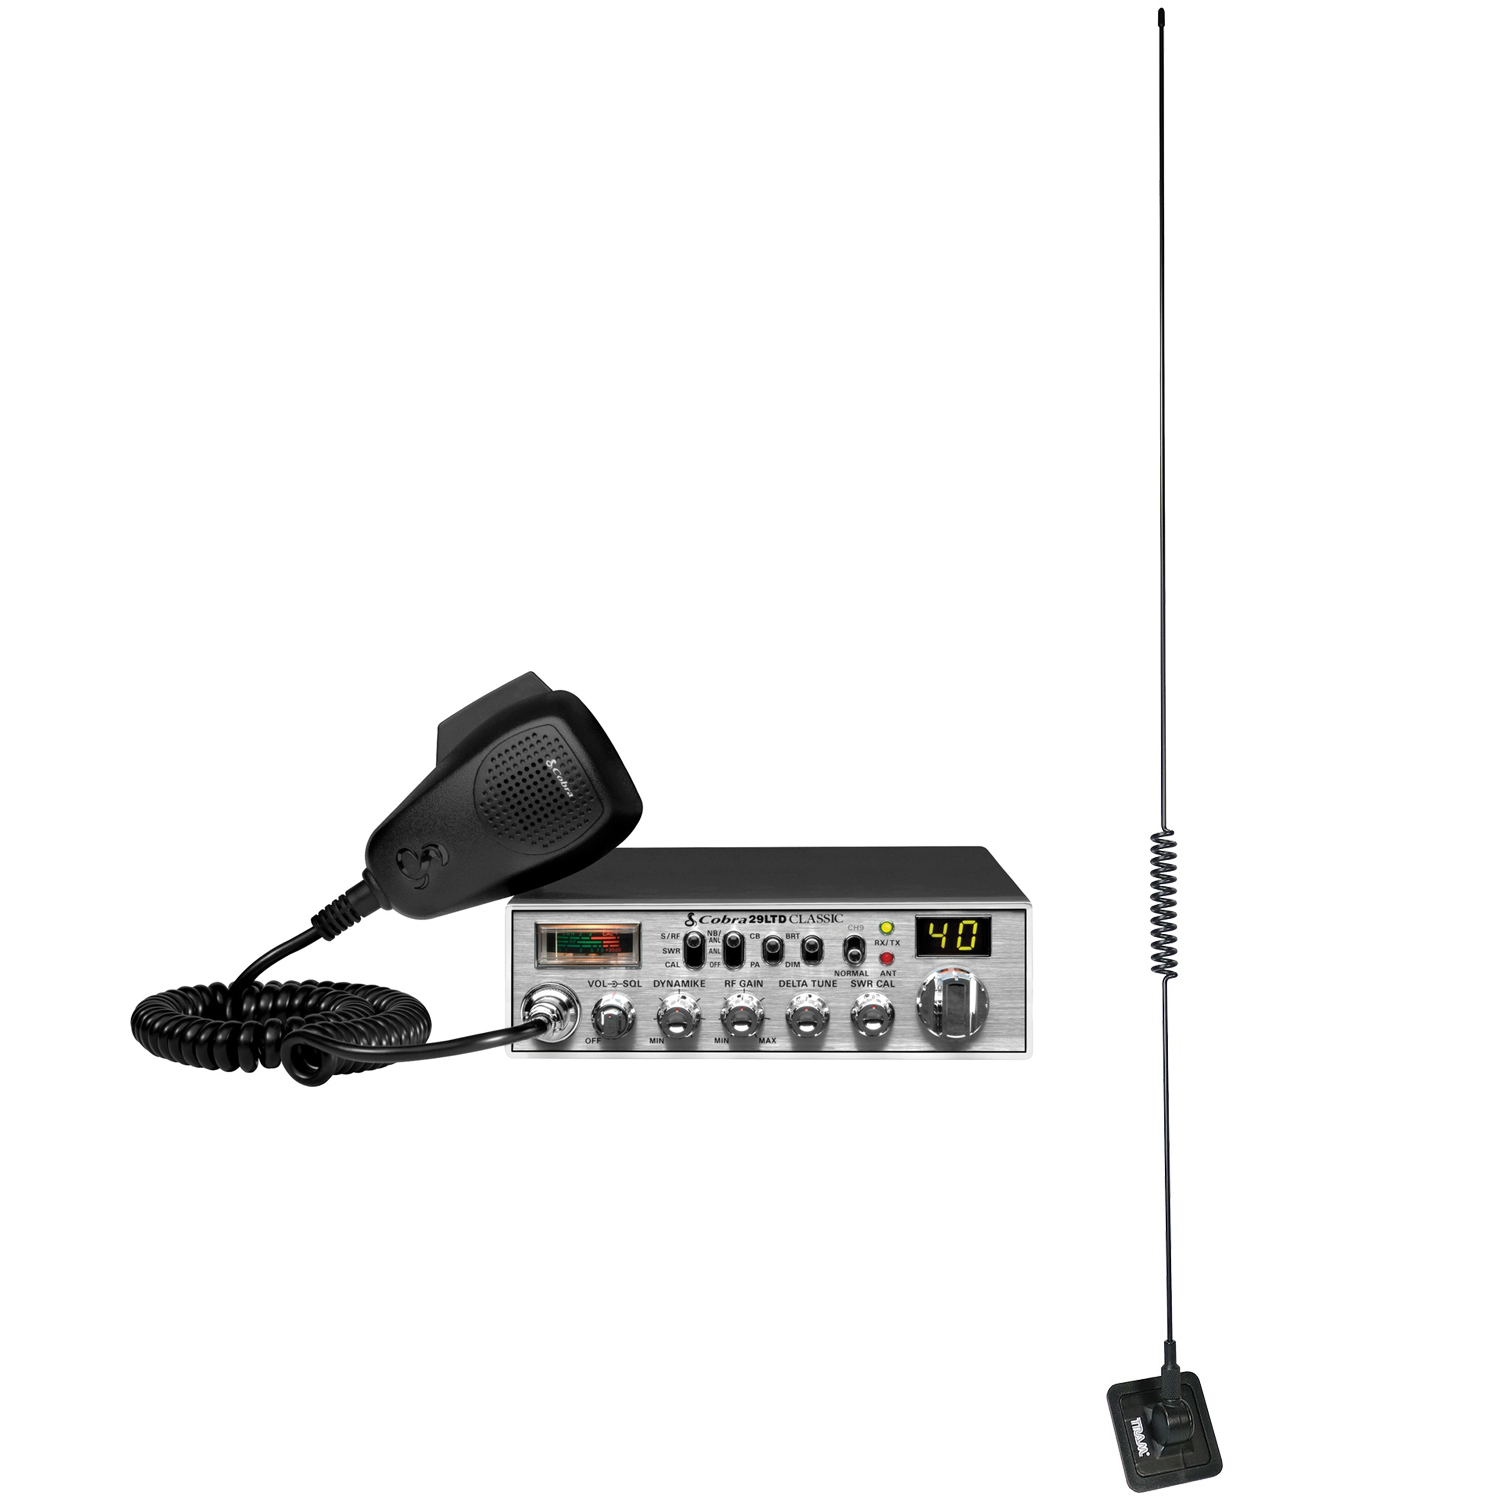 Cobra 29 LTD Classic CB Radio (Instant Channel 9) & TRAM 1198 Glass Mount CB with Weather-Band Mobile Antenna - image 1 of 2